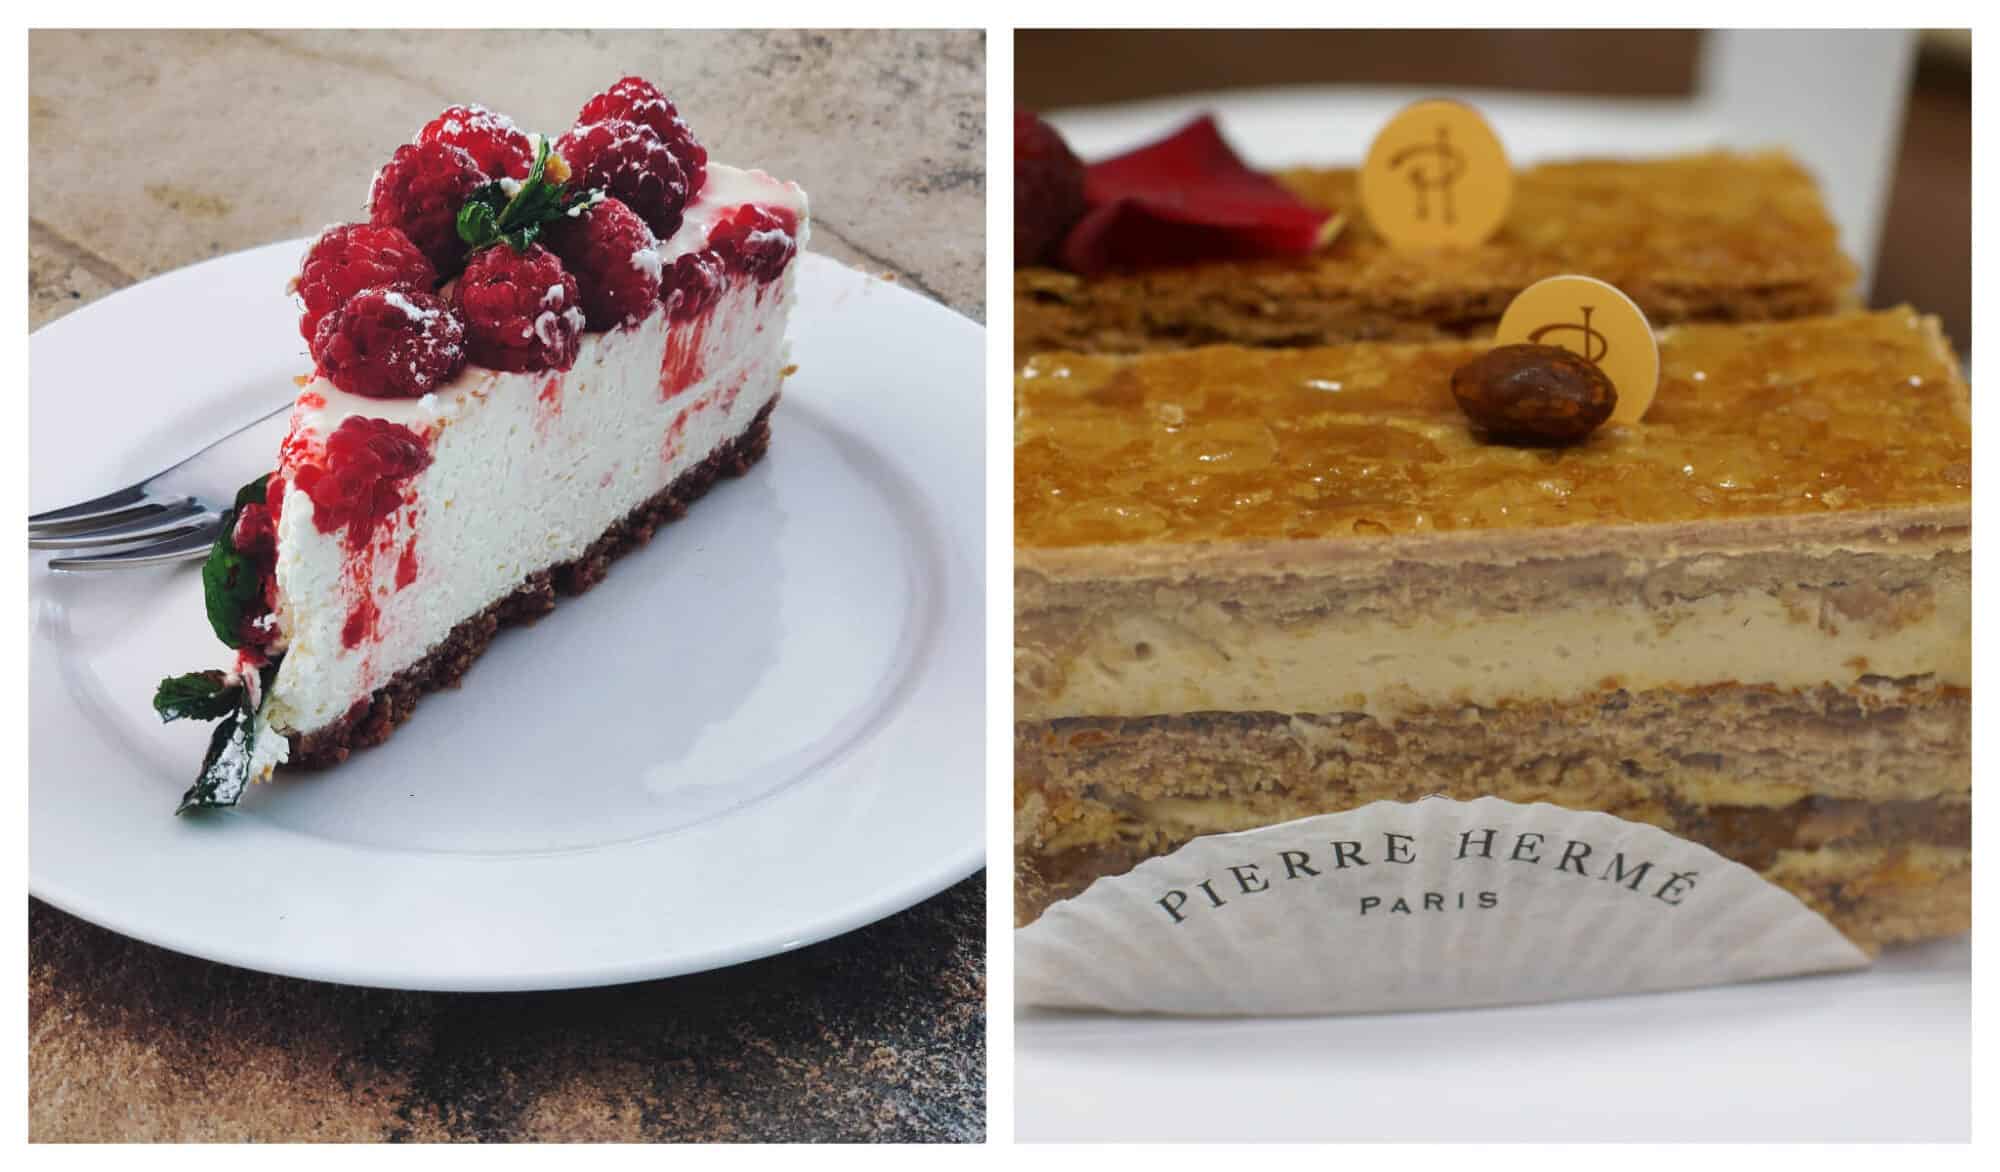 left: a slice of strawberry cheesecake sat on a white plate on a wooden table; right: a millefeuille from Pierre Hermé sat on a white plate.